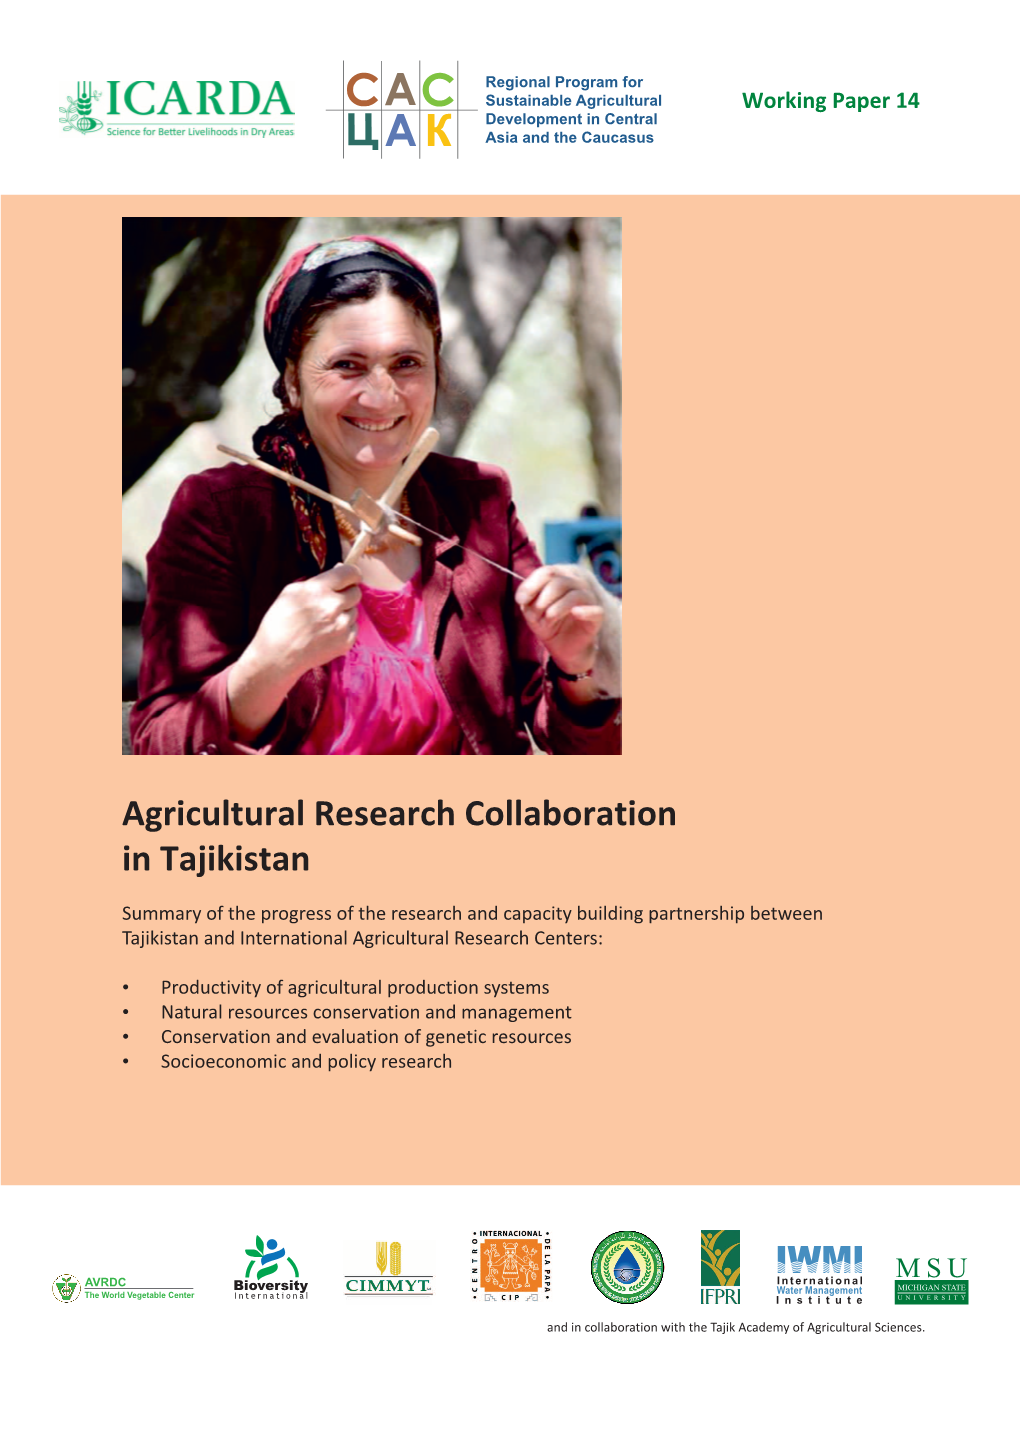 Agricultural Research Collaboration in Tajikistan